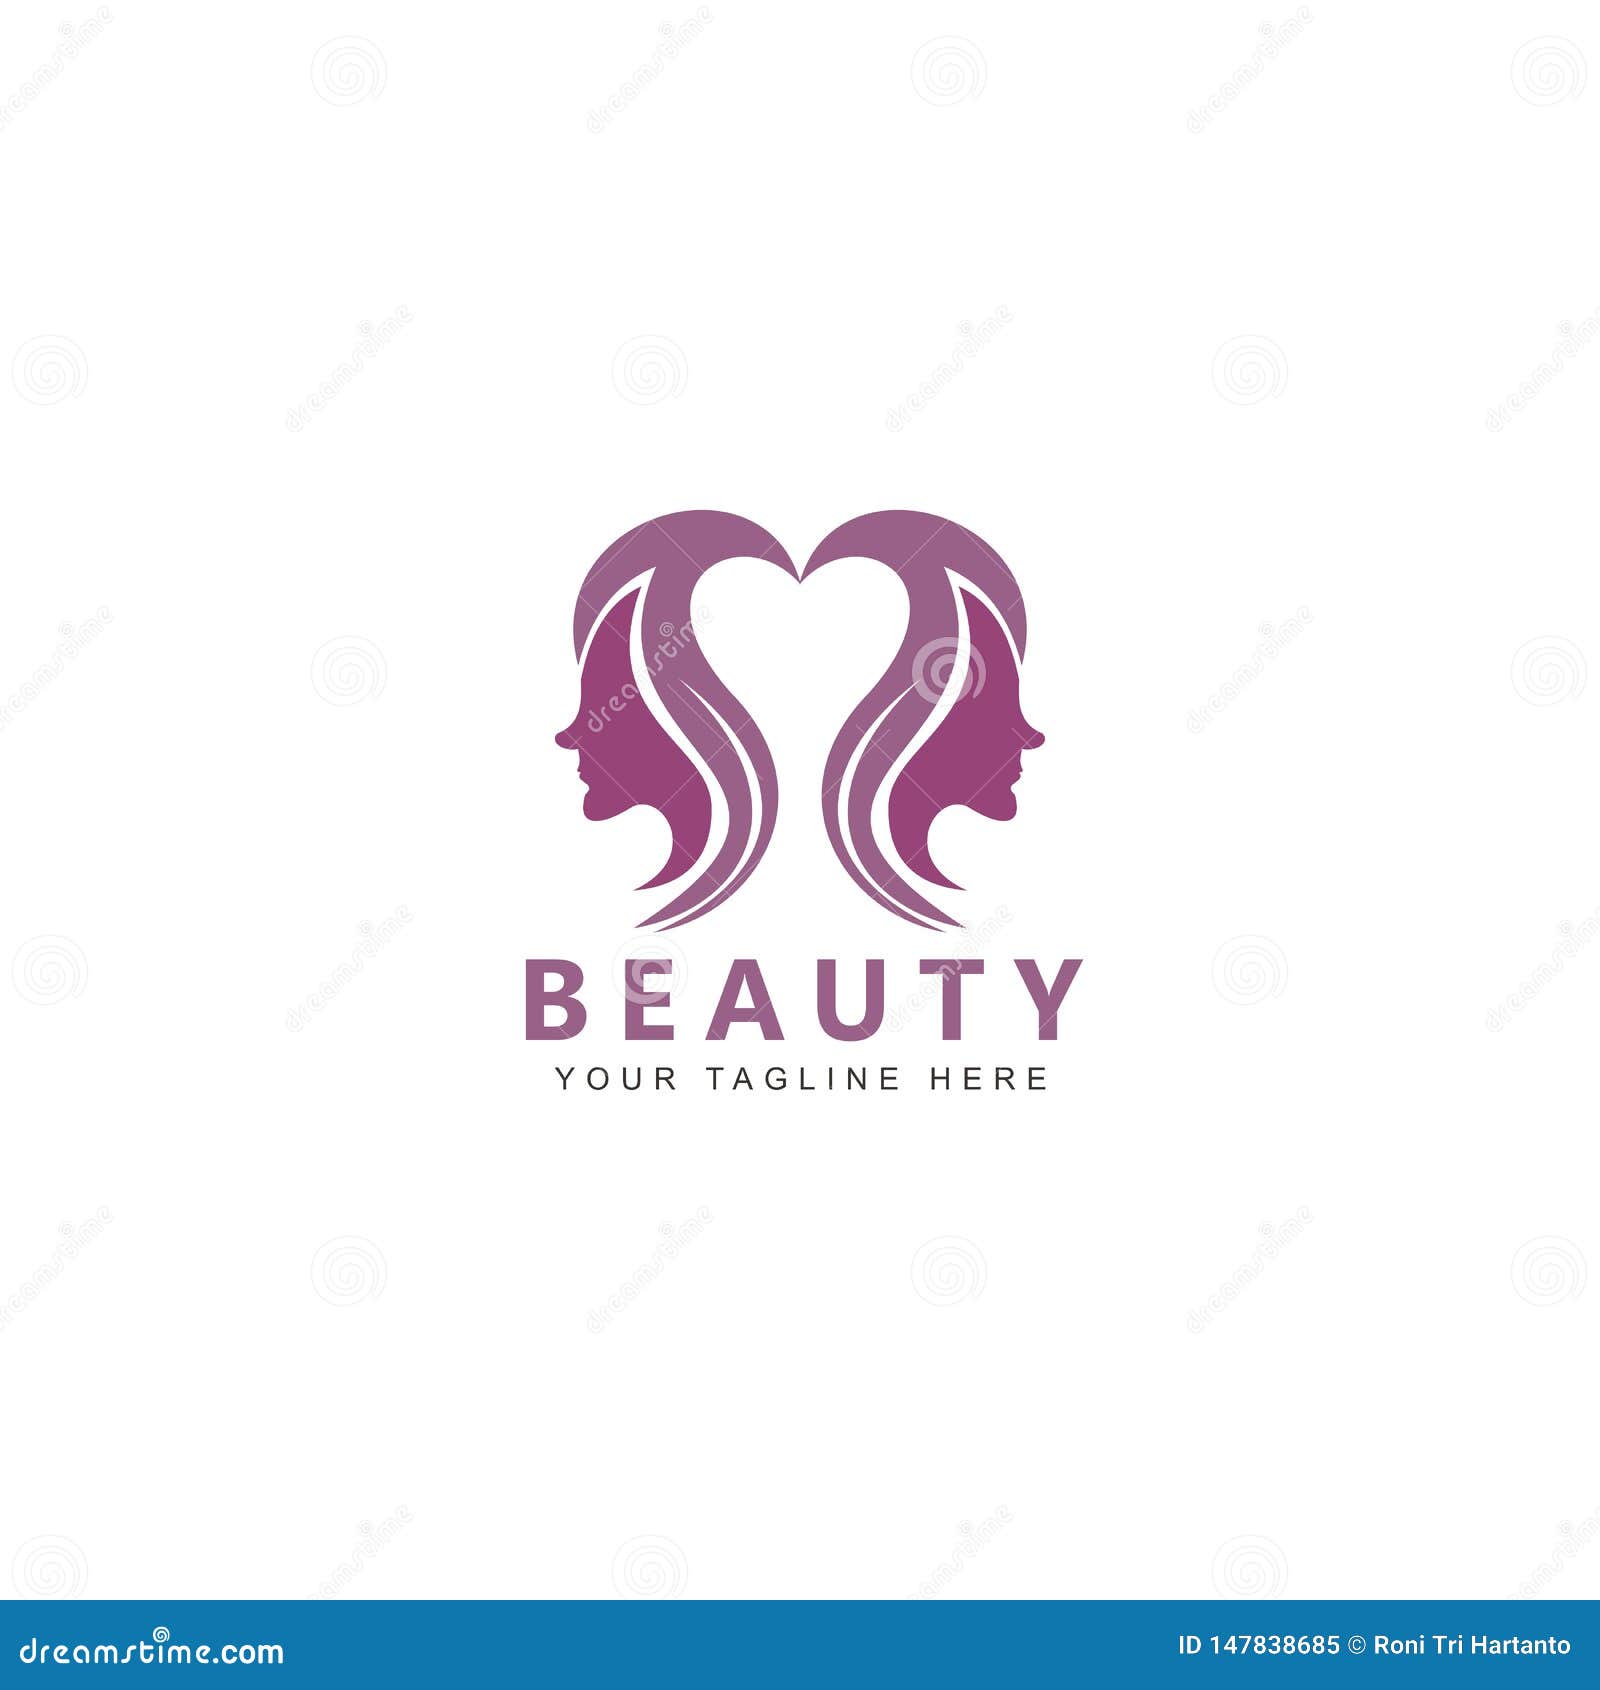 Beauty And Cosmetic Logo Design Inspiration Stock Vector Illustration Of Boutique Fashion